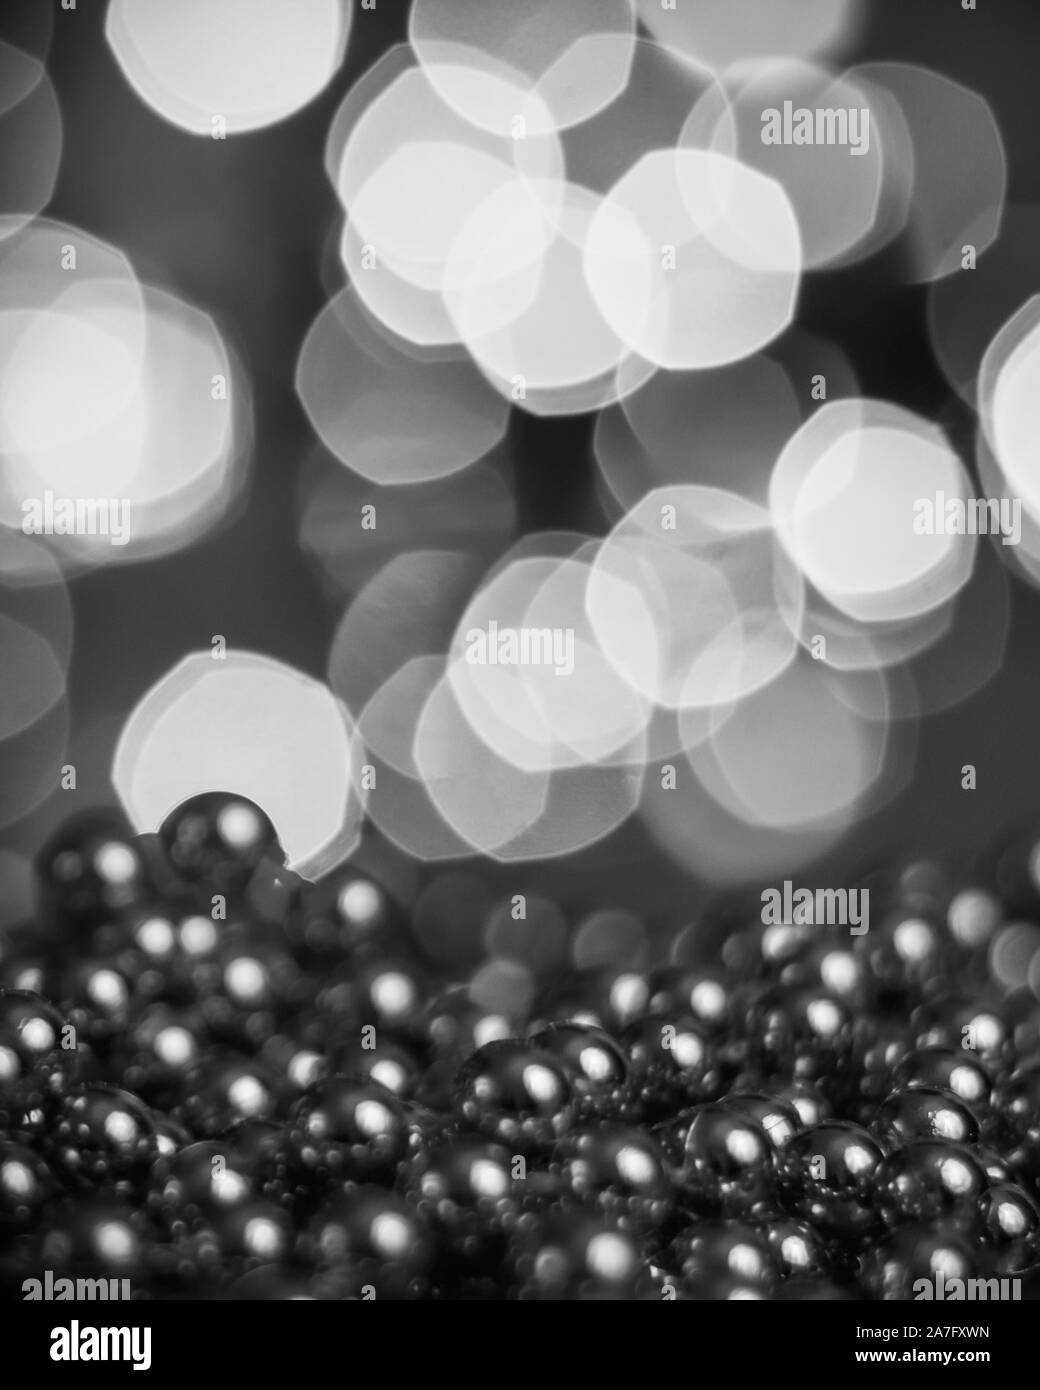 Christmas background, with blurred Christmas lights, beautiful bokeh and a chain of glossy balls in the foreground. Christmas decorations Stock Photo